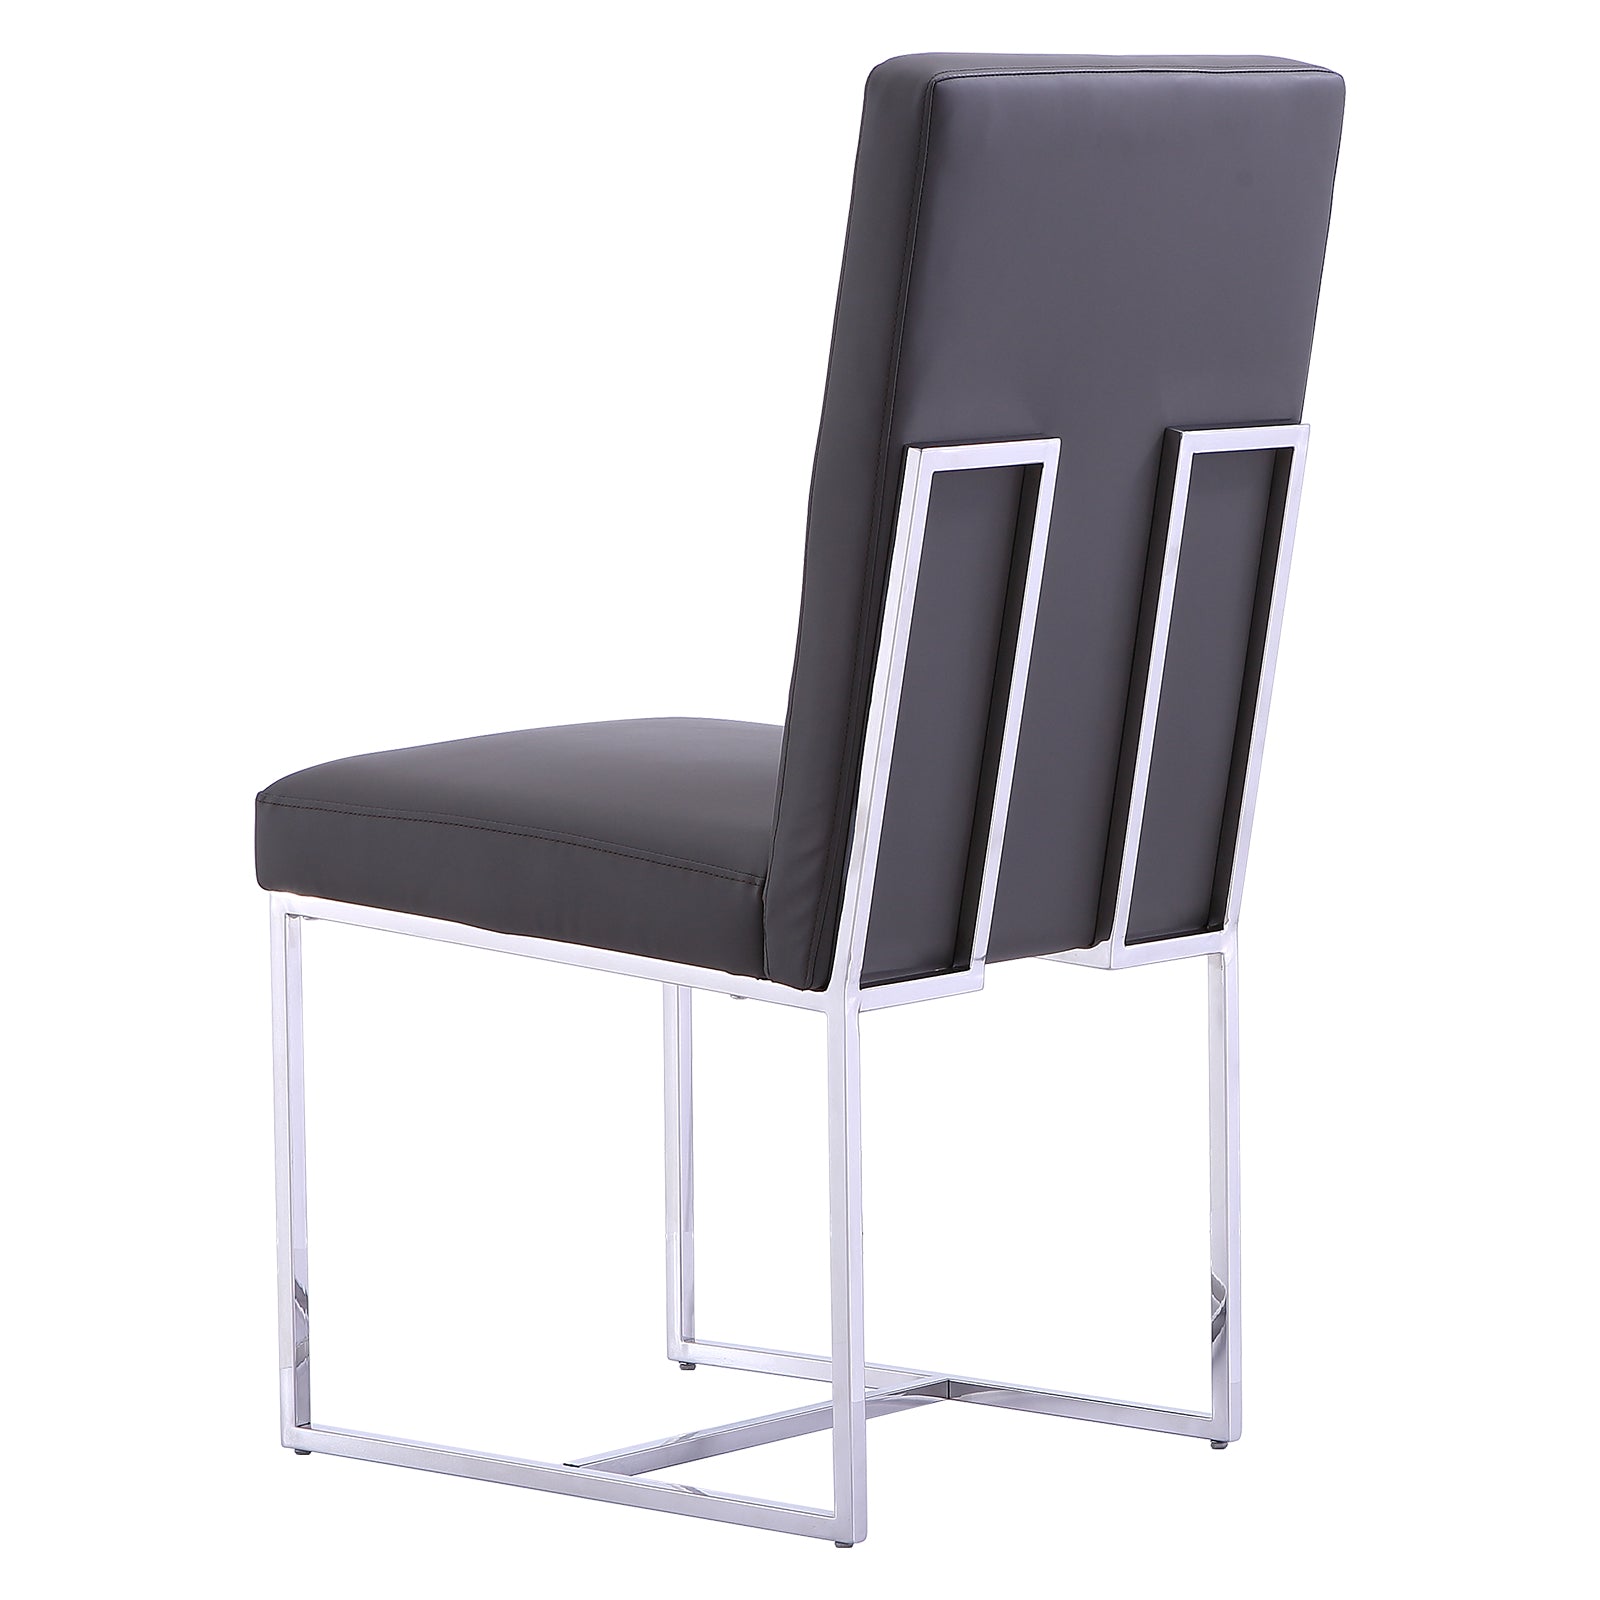 Gray leather Dining Chairs | Square backrest| Metal sled base | C145